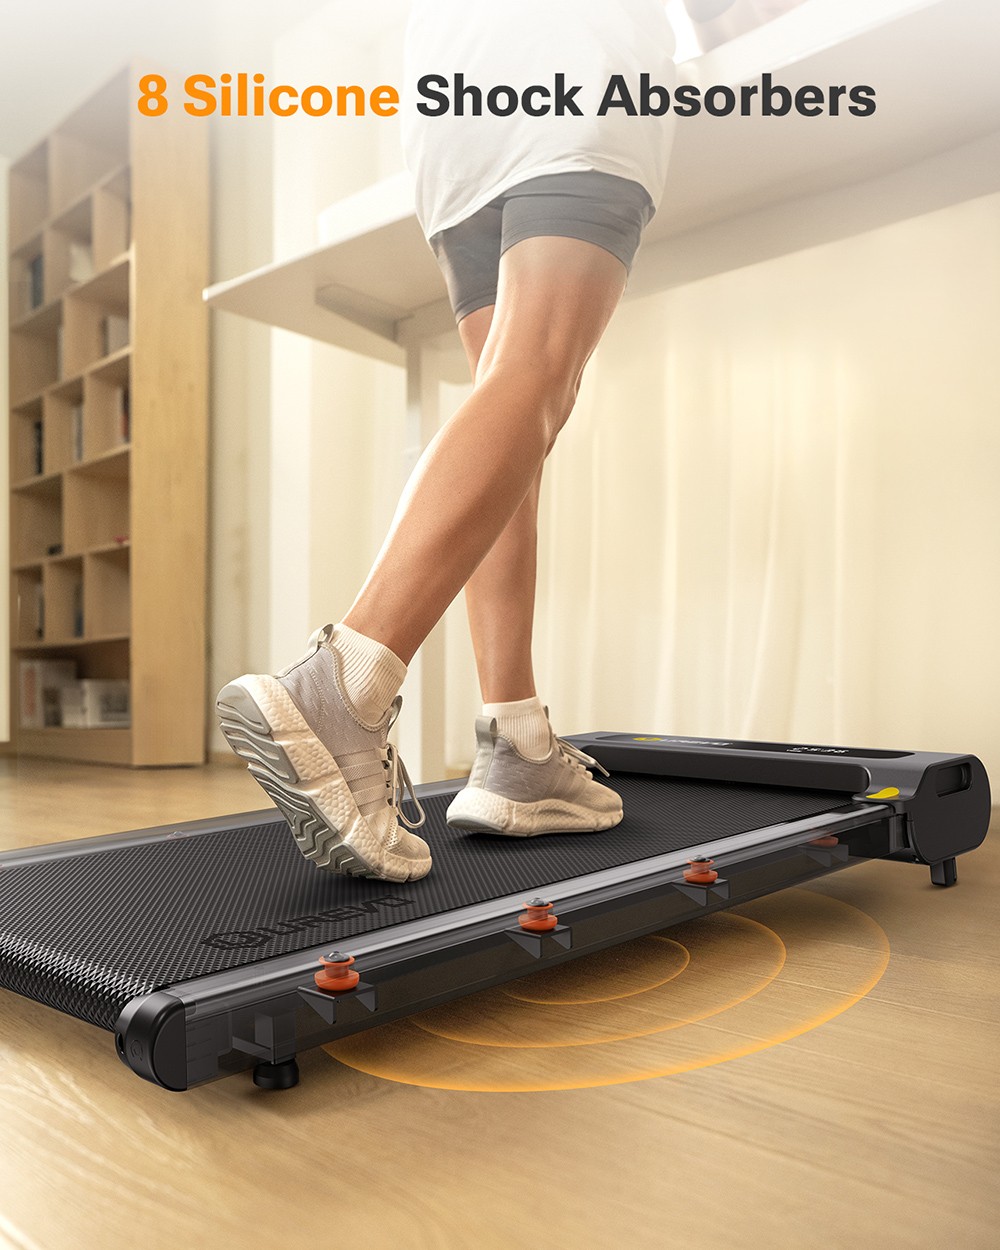 UREVO E3S Walking Treadmill with Incline, Quiet 2.25 HP Motor, LED Display, Remote Control, 0.9-6.4 kmph Speed